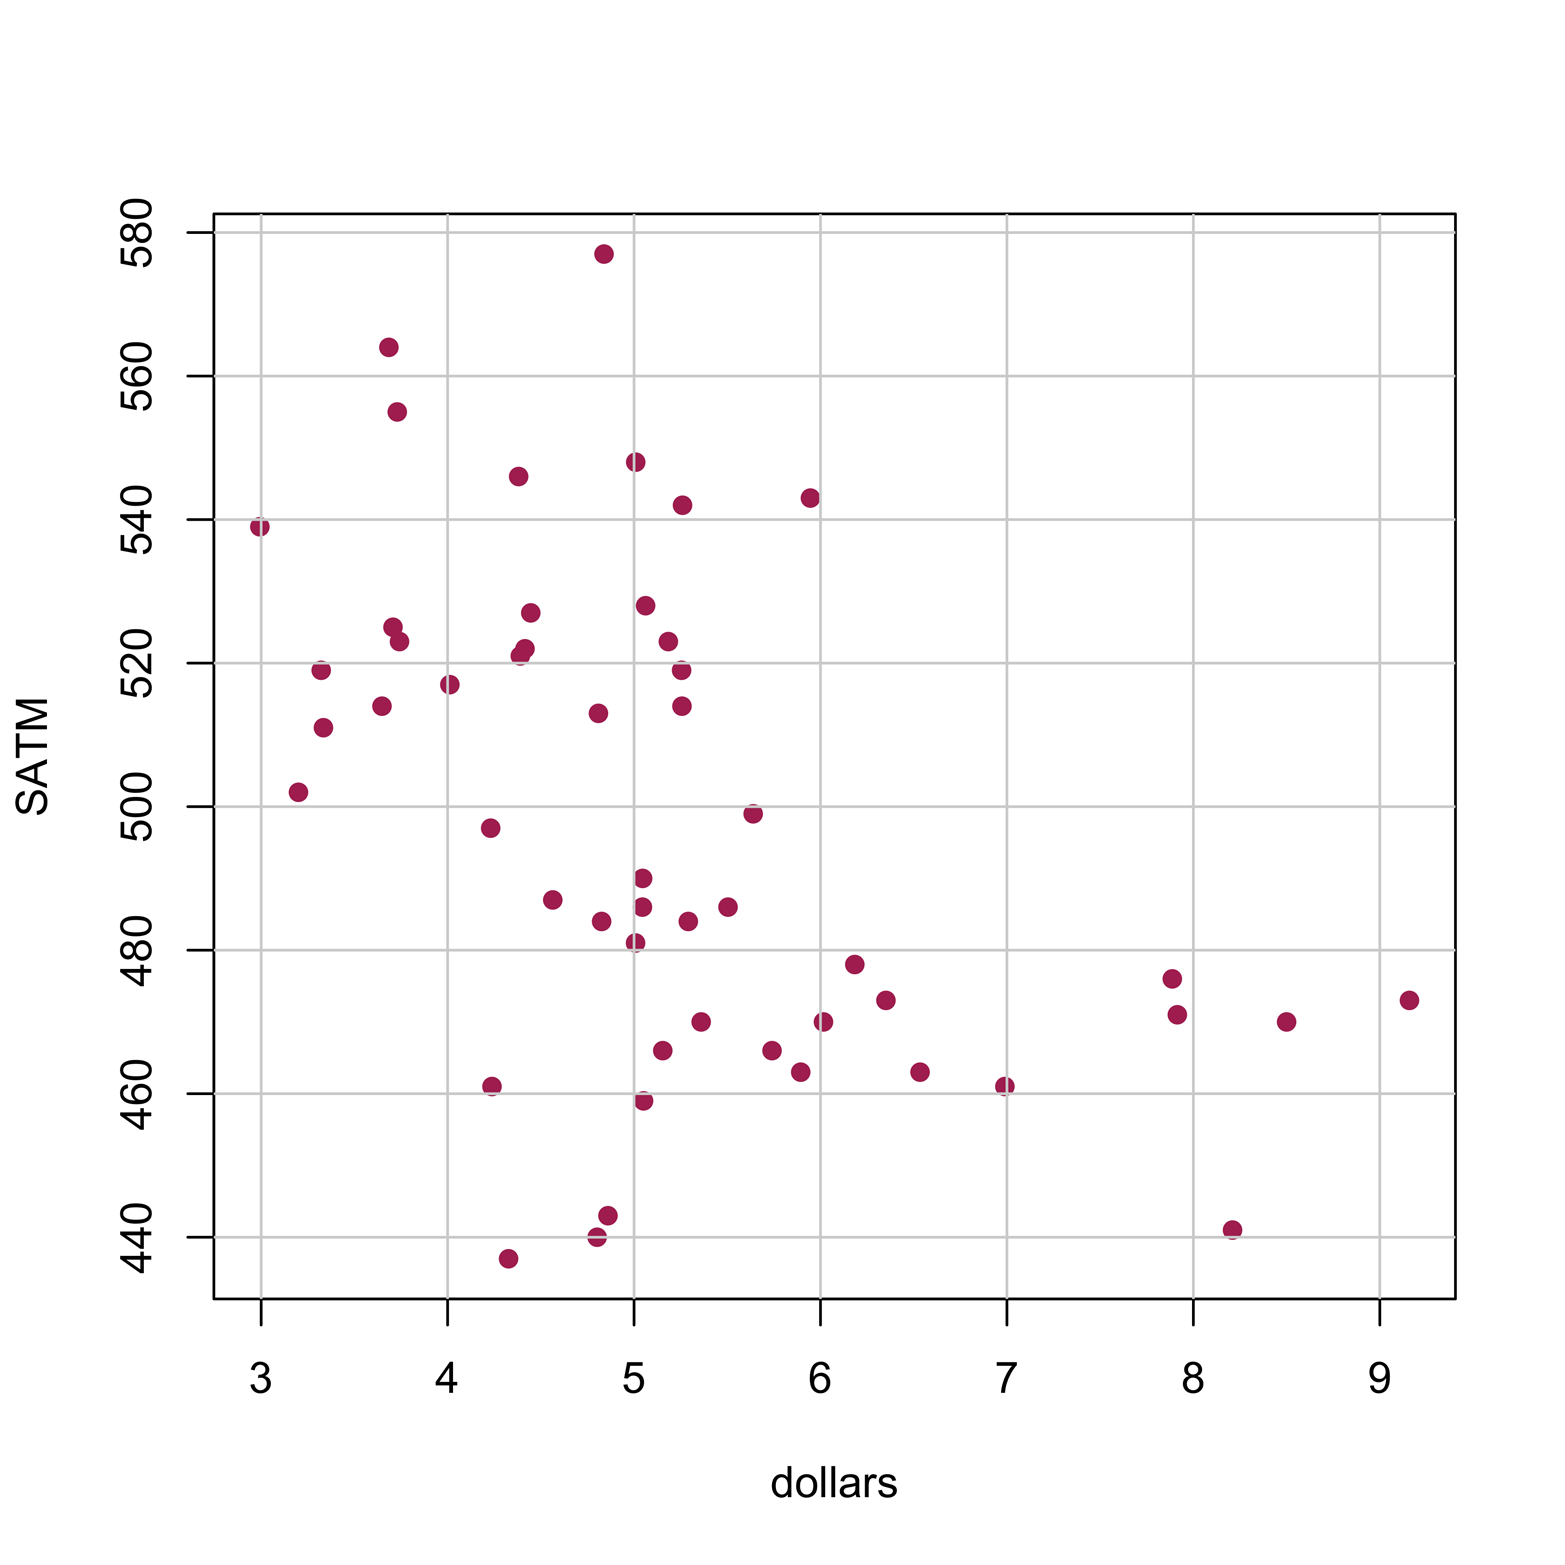 A scatter plot of the state average SATM score and the average amount of state spending on public education, per student, in thousands of dollars. There are 51 points, one for each state and the District of Columbia.